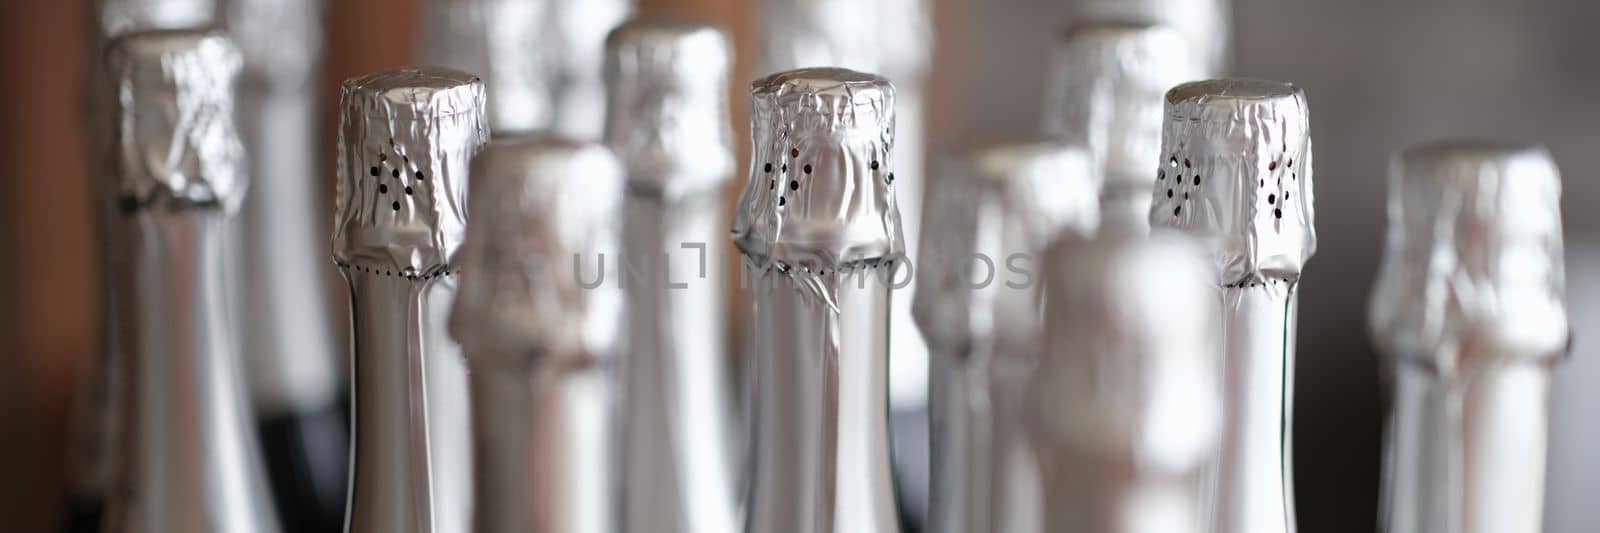 Bottles of champagne are on display in restaurant by kuprevich